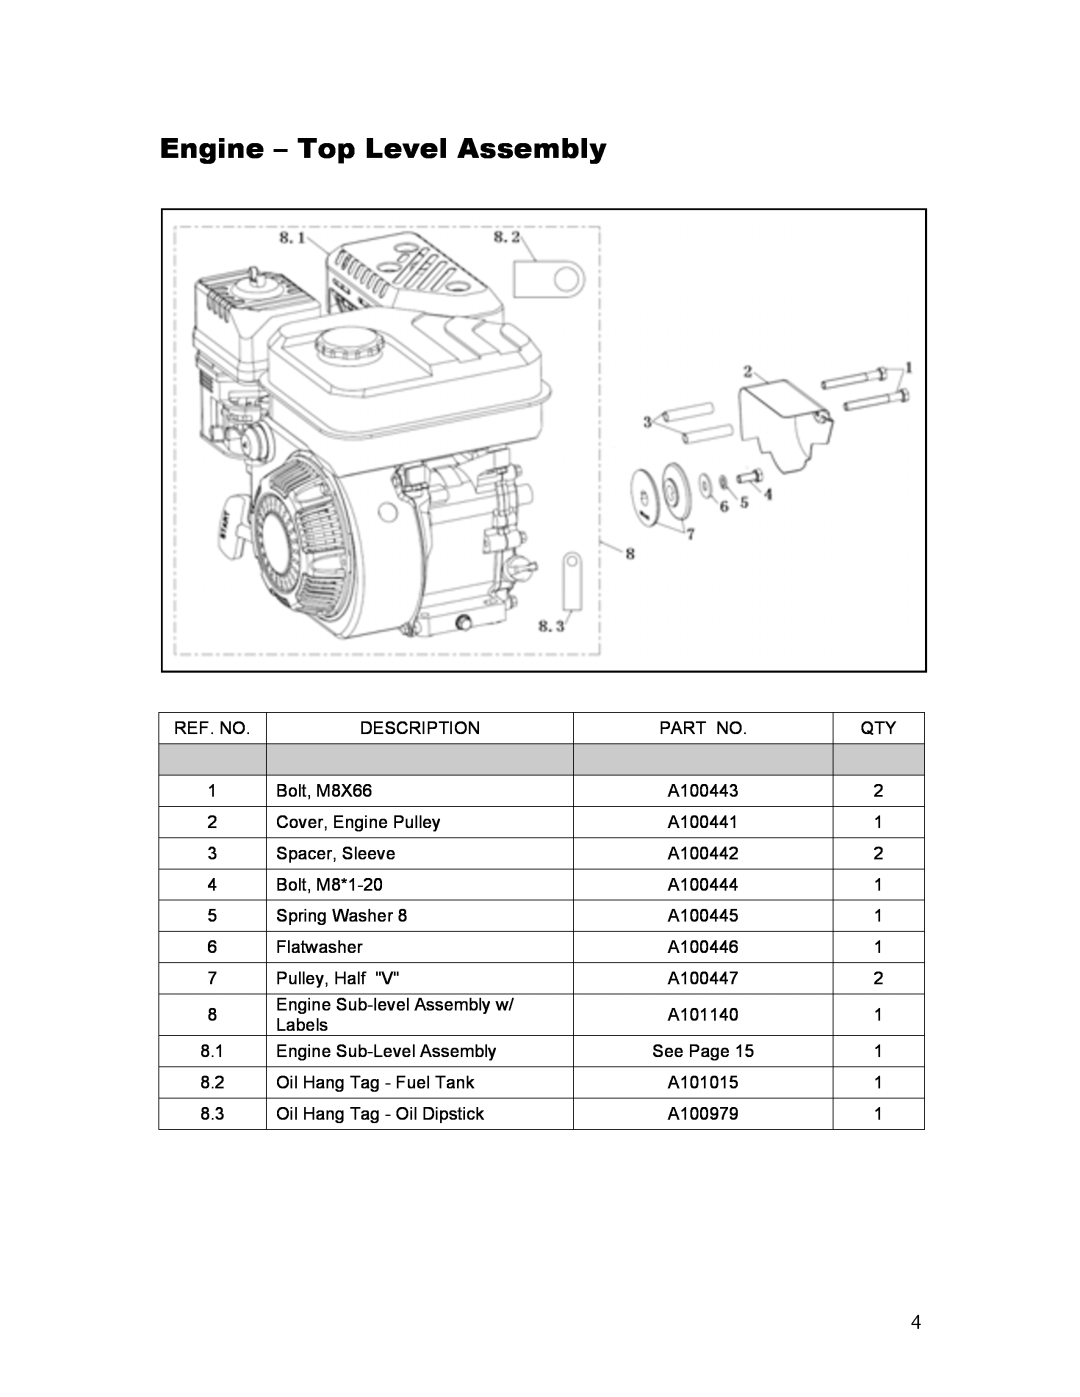 Powermate P-WLE-1639-[E] manual Engine - Top Level Assembly 